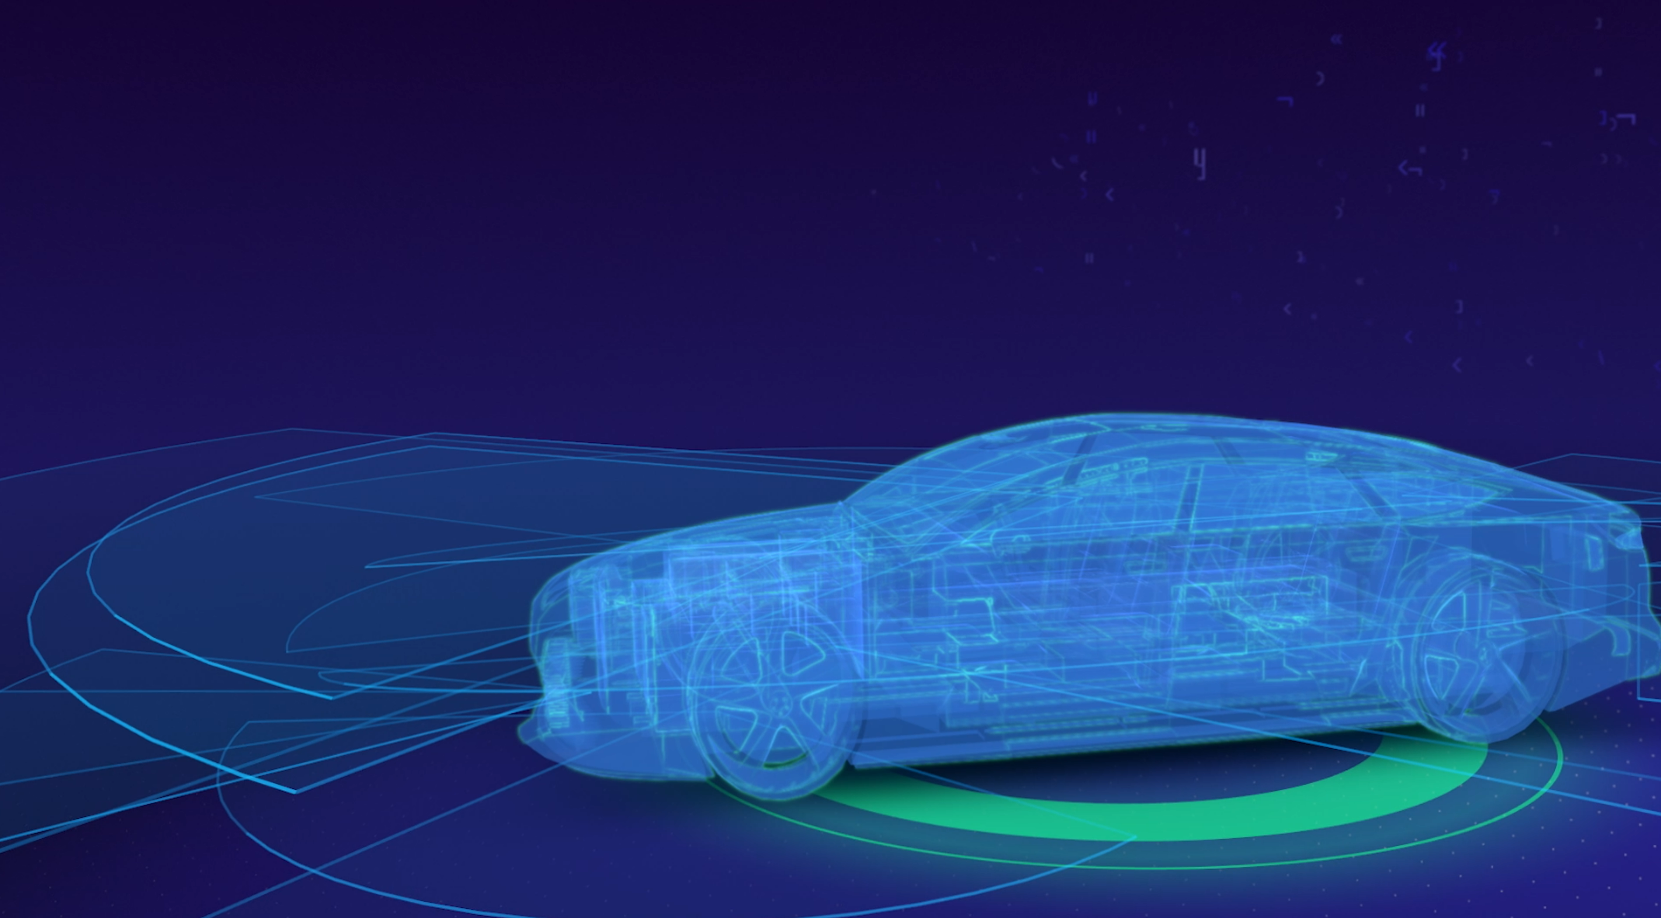 Sensor fusion combines data from sensors to create an environment model that supports automated driving functions.